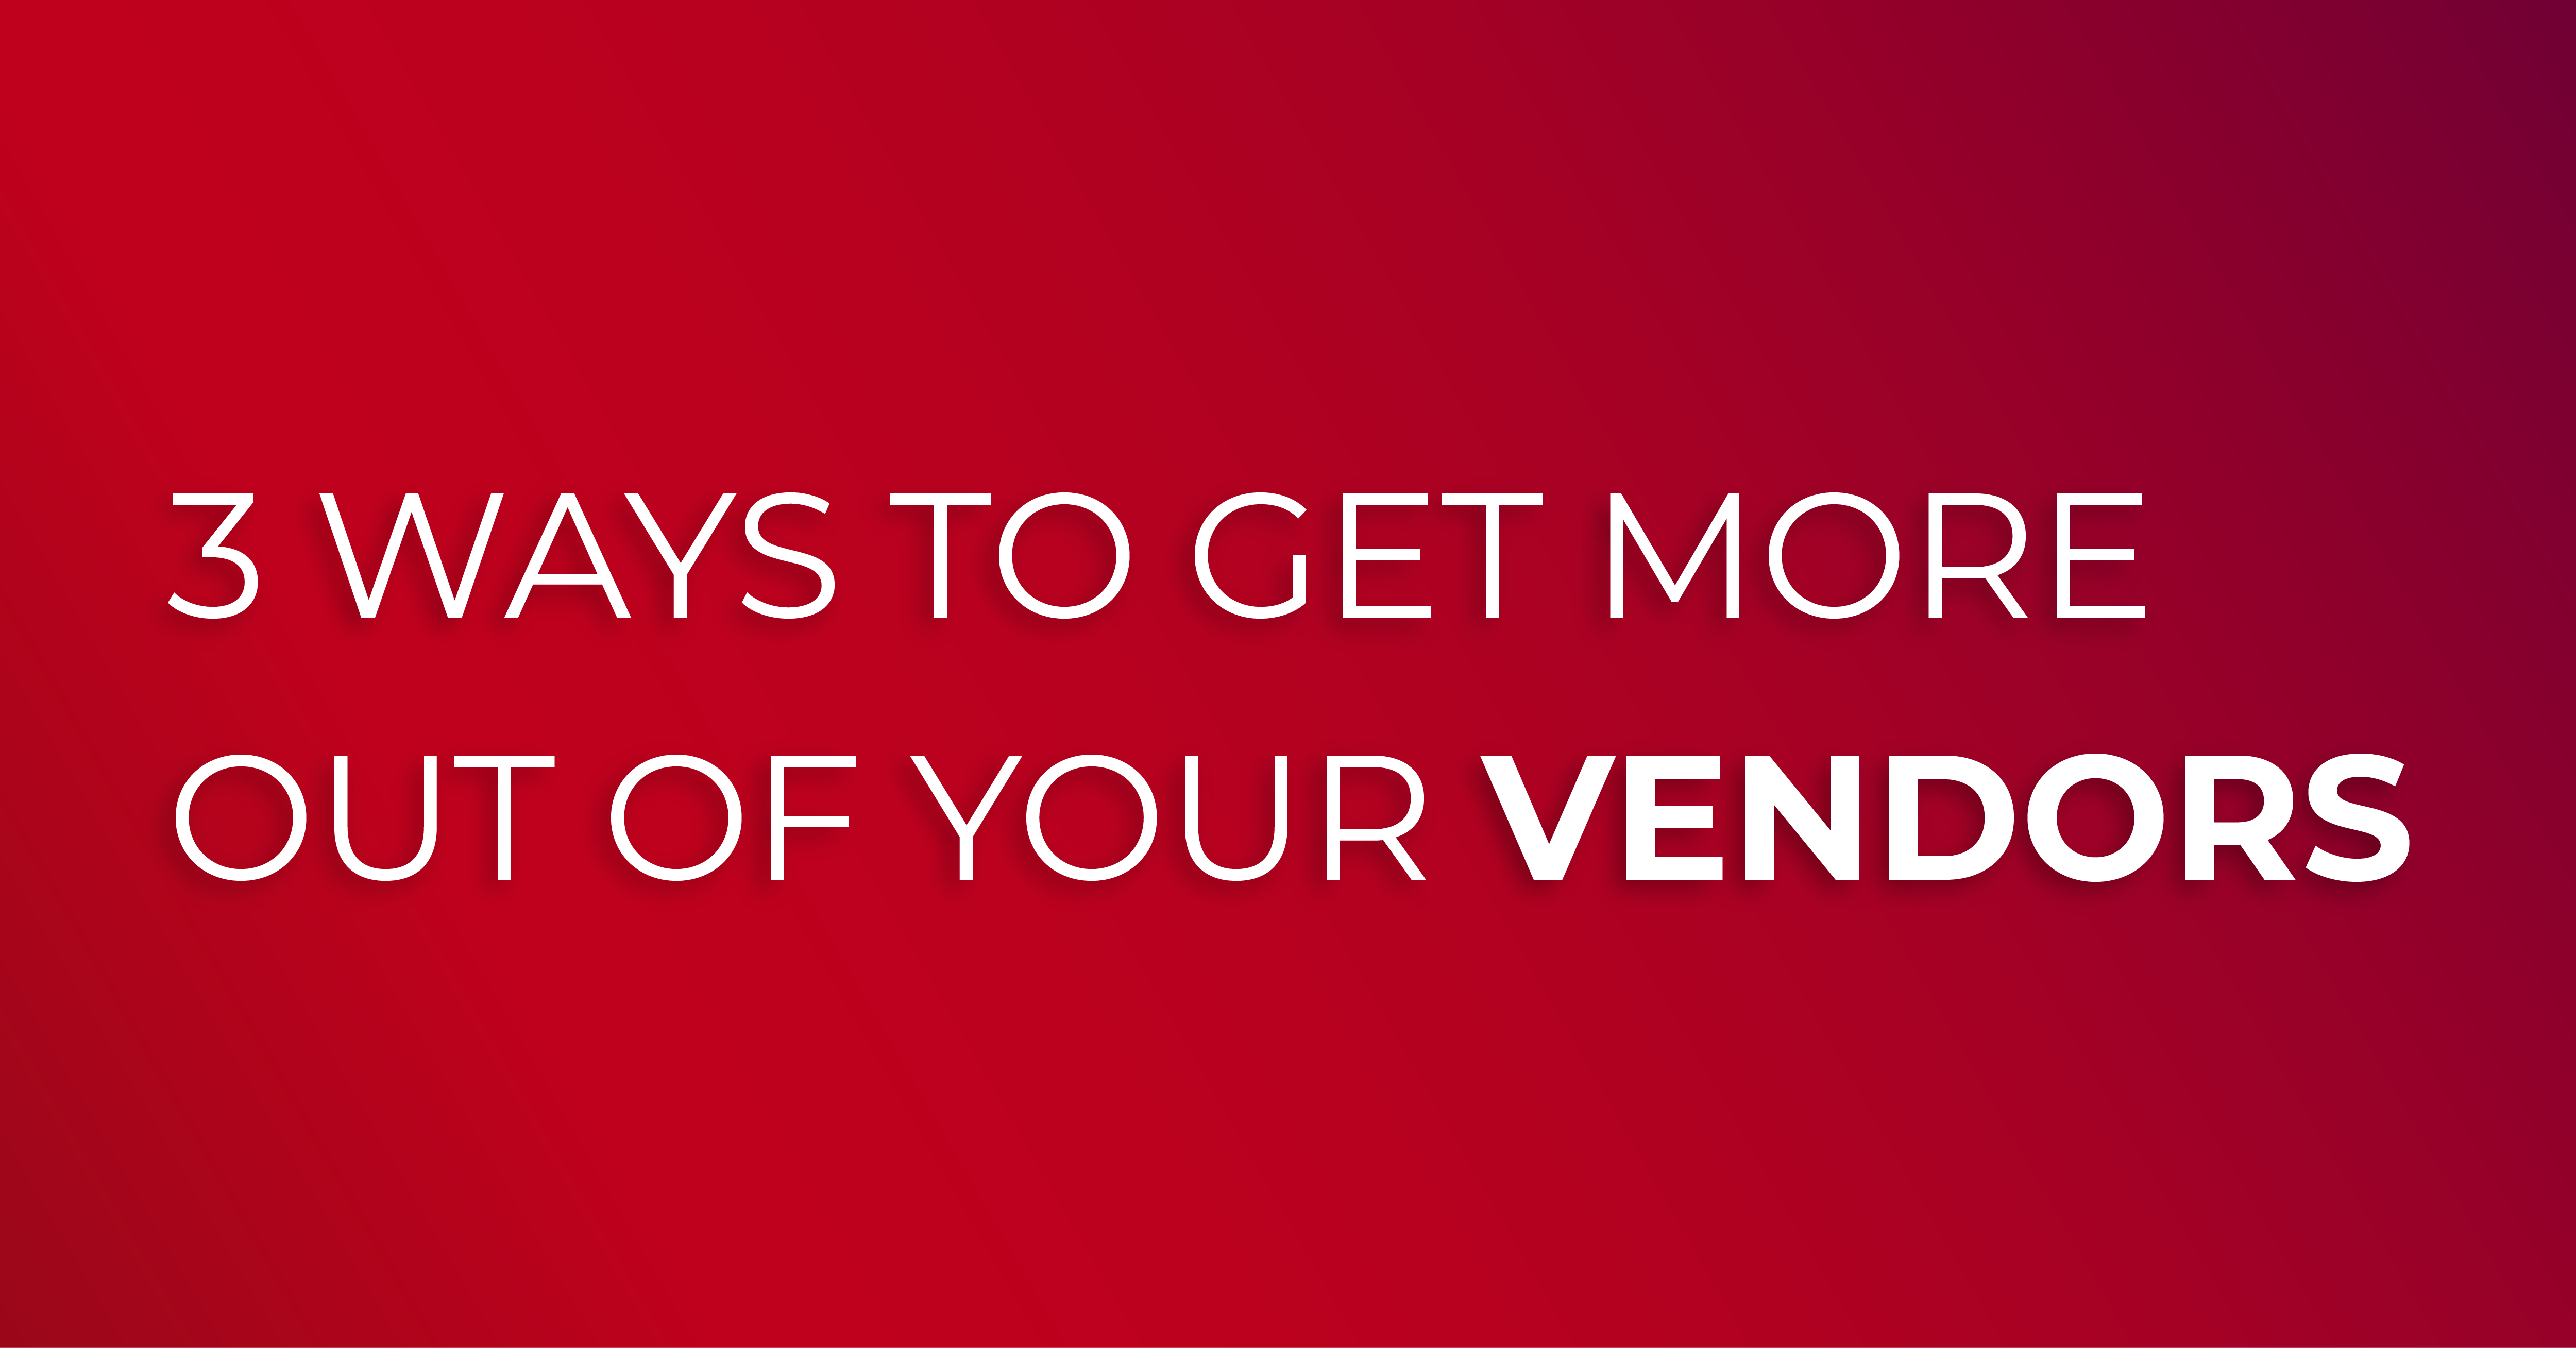 get-more-out-of-your-vendors-blog